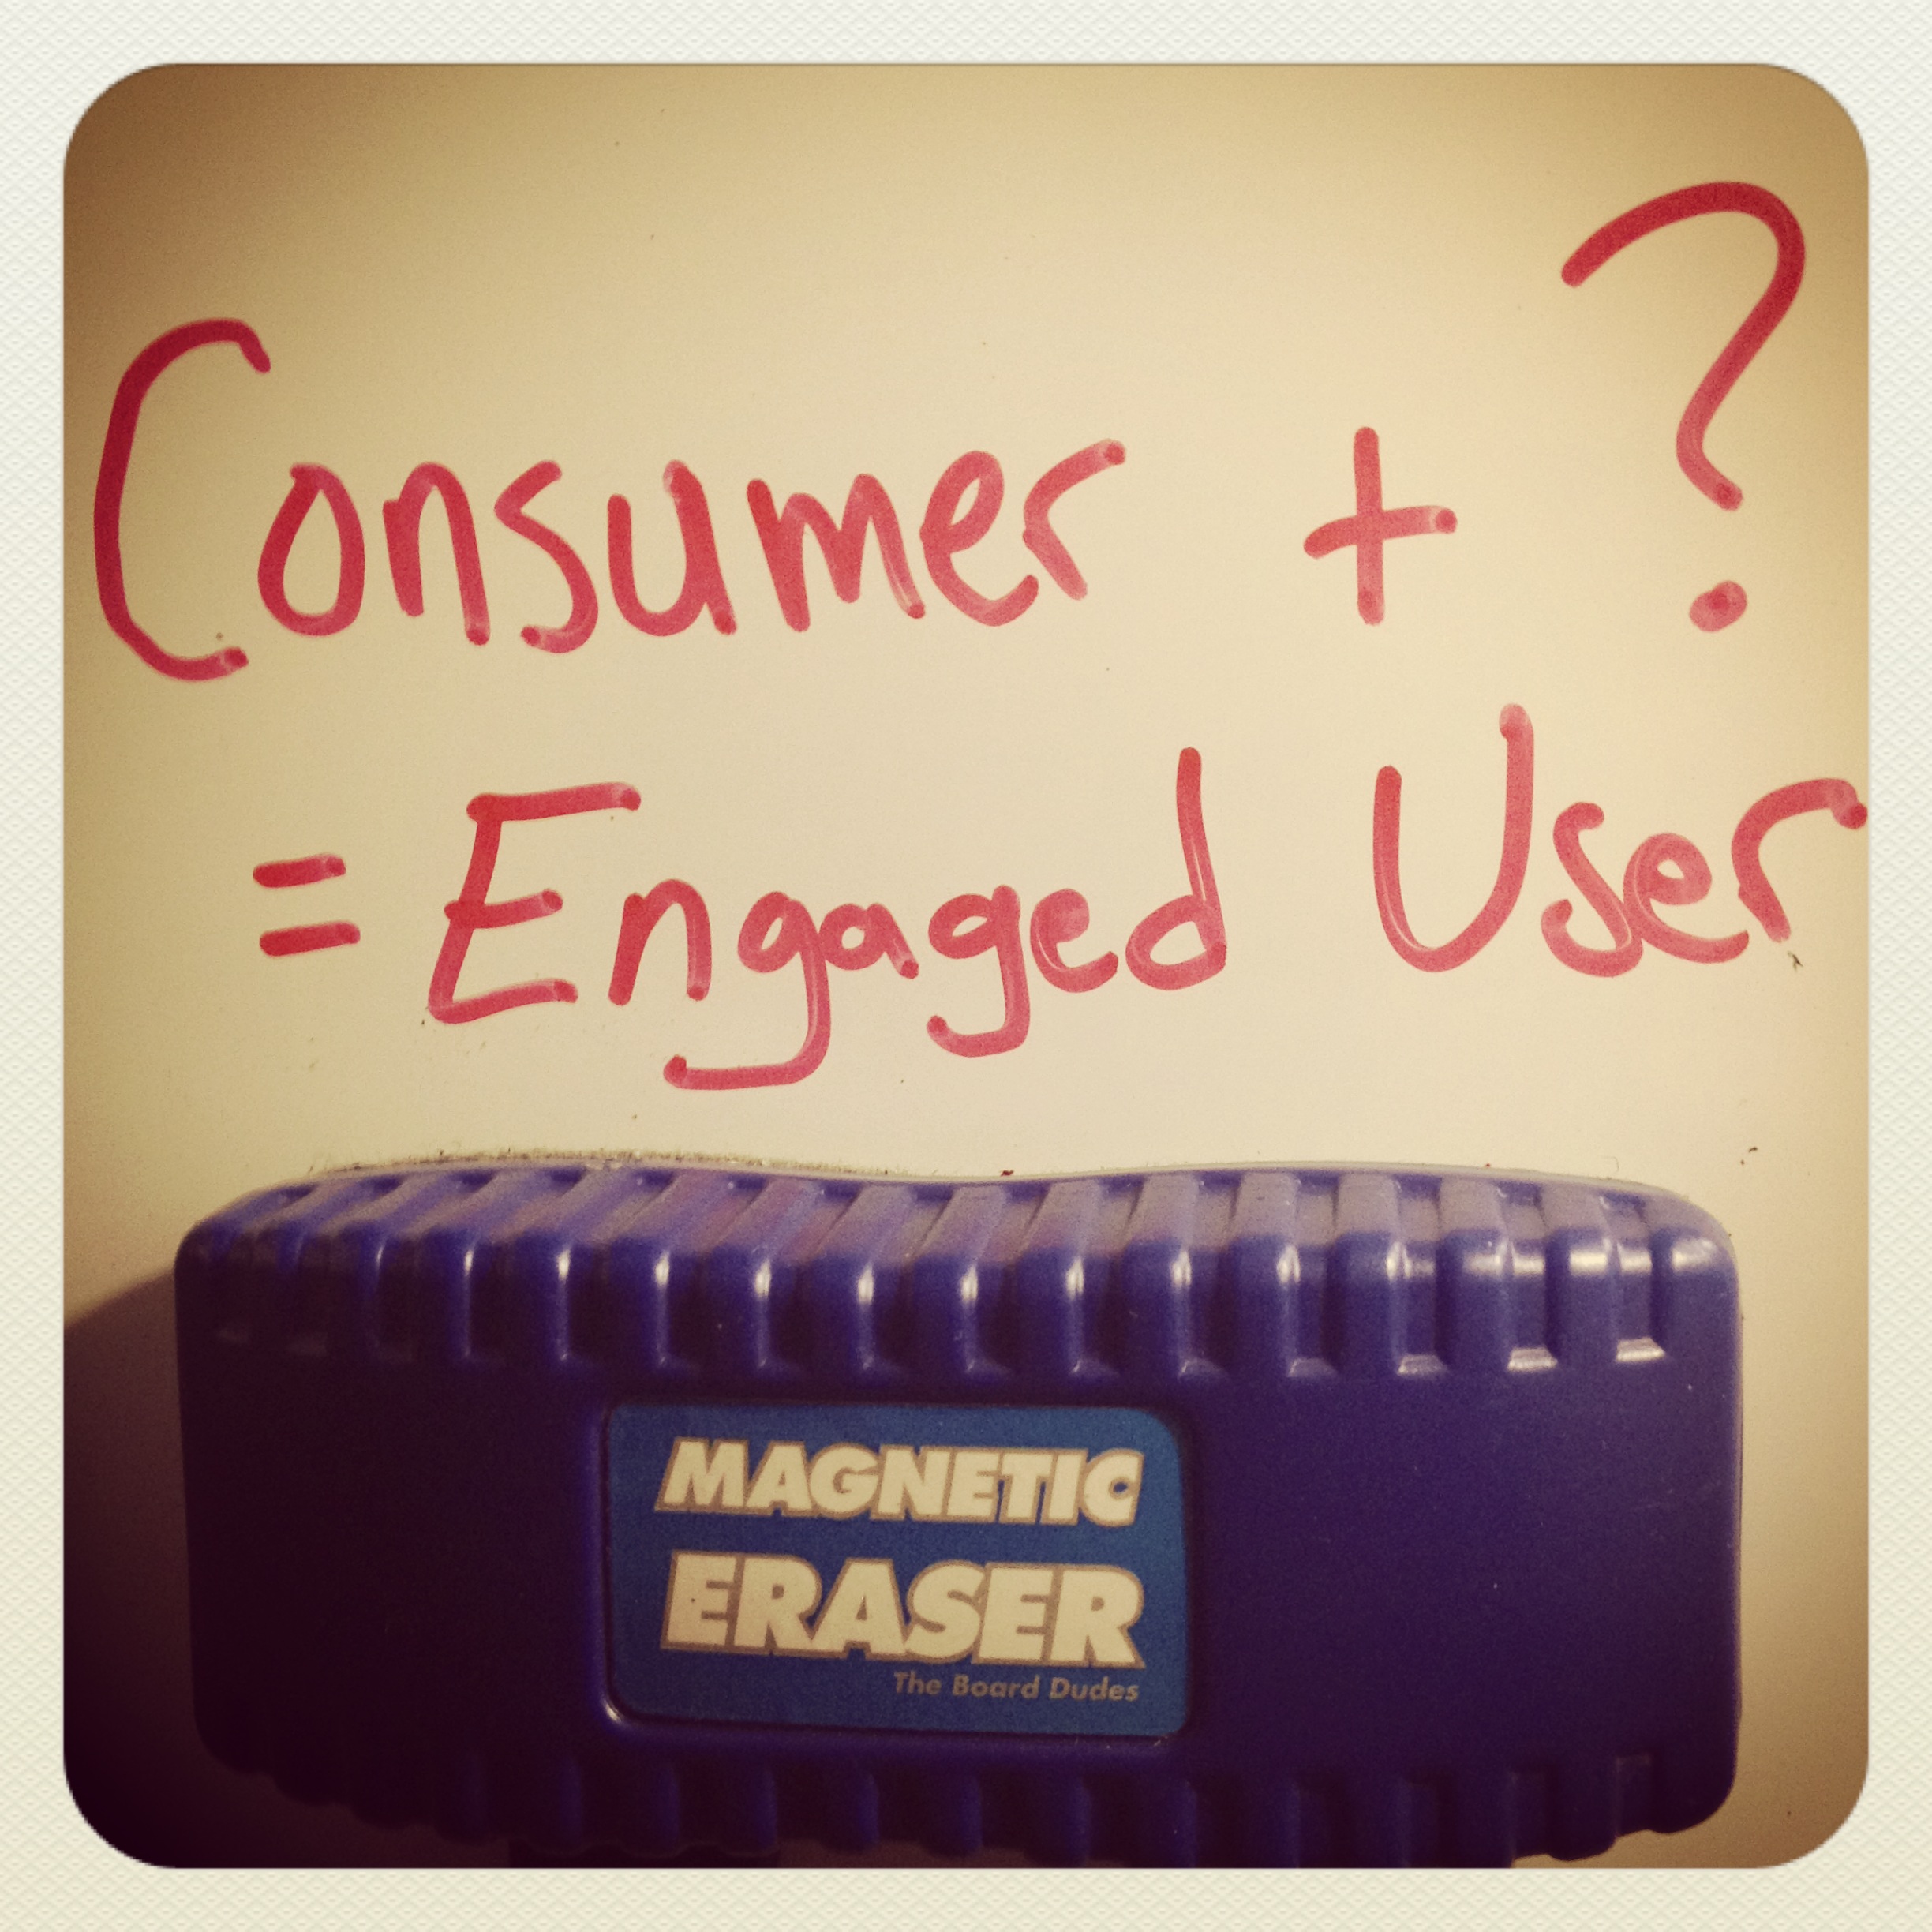 Consumptions vs. Engaged User